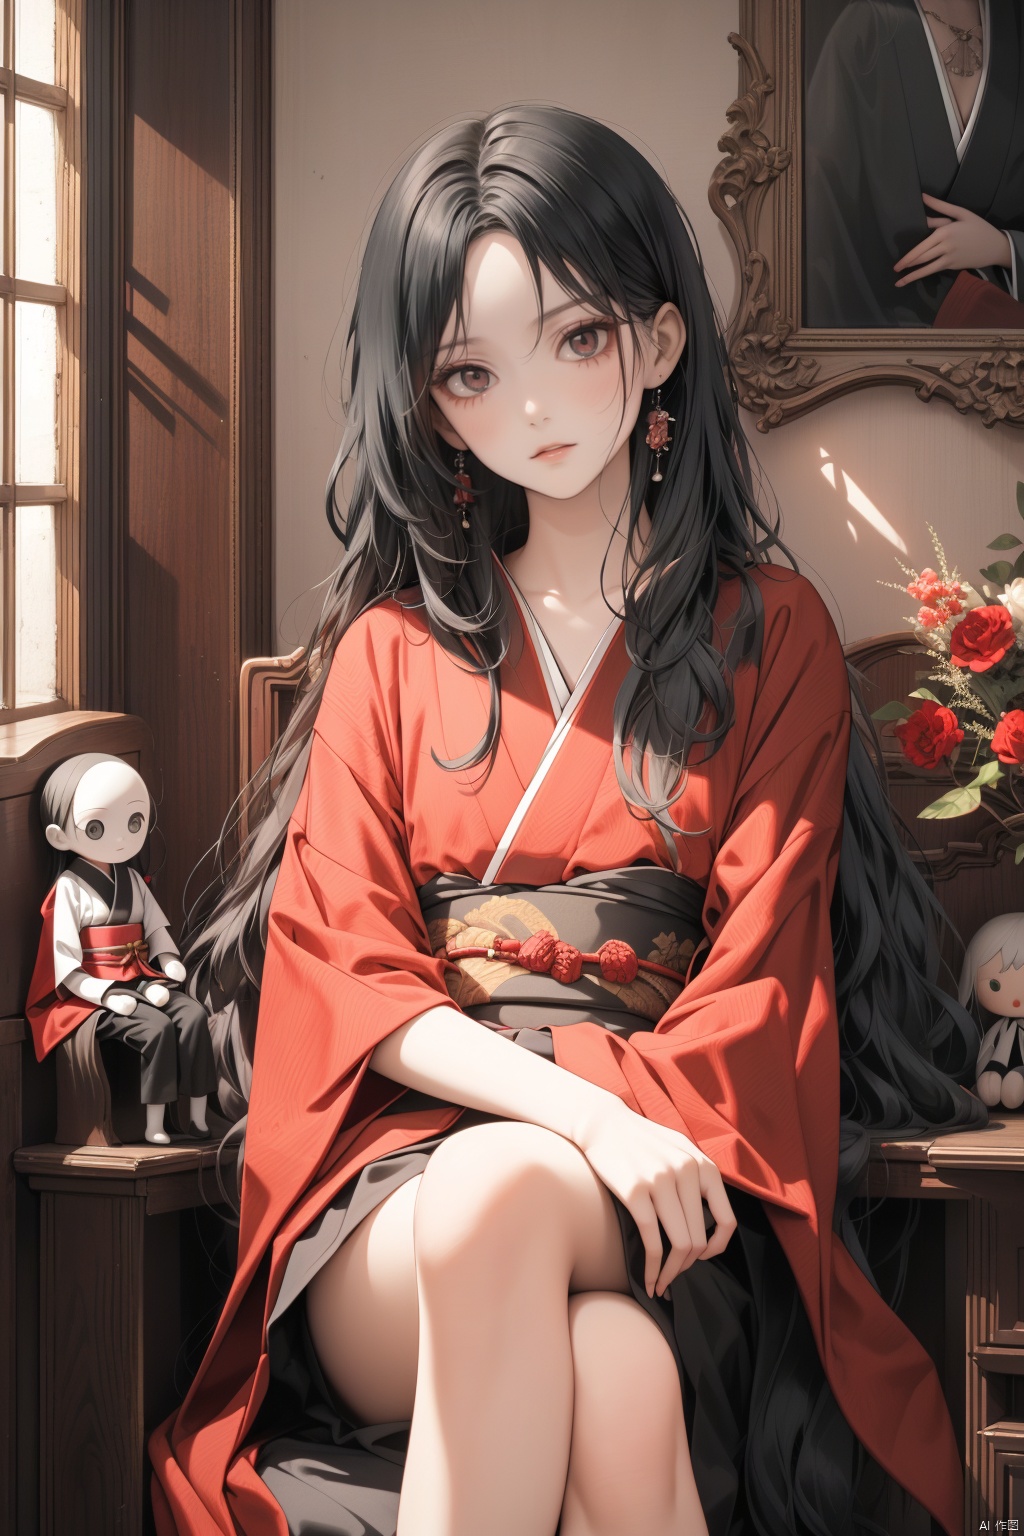 Japanese cursed doll in a transparent box, black long hair, red kimono, evil look, black eyes, porcelain skin, sitting upright - with crossed legs, antique doll, in a dark room, horror,